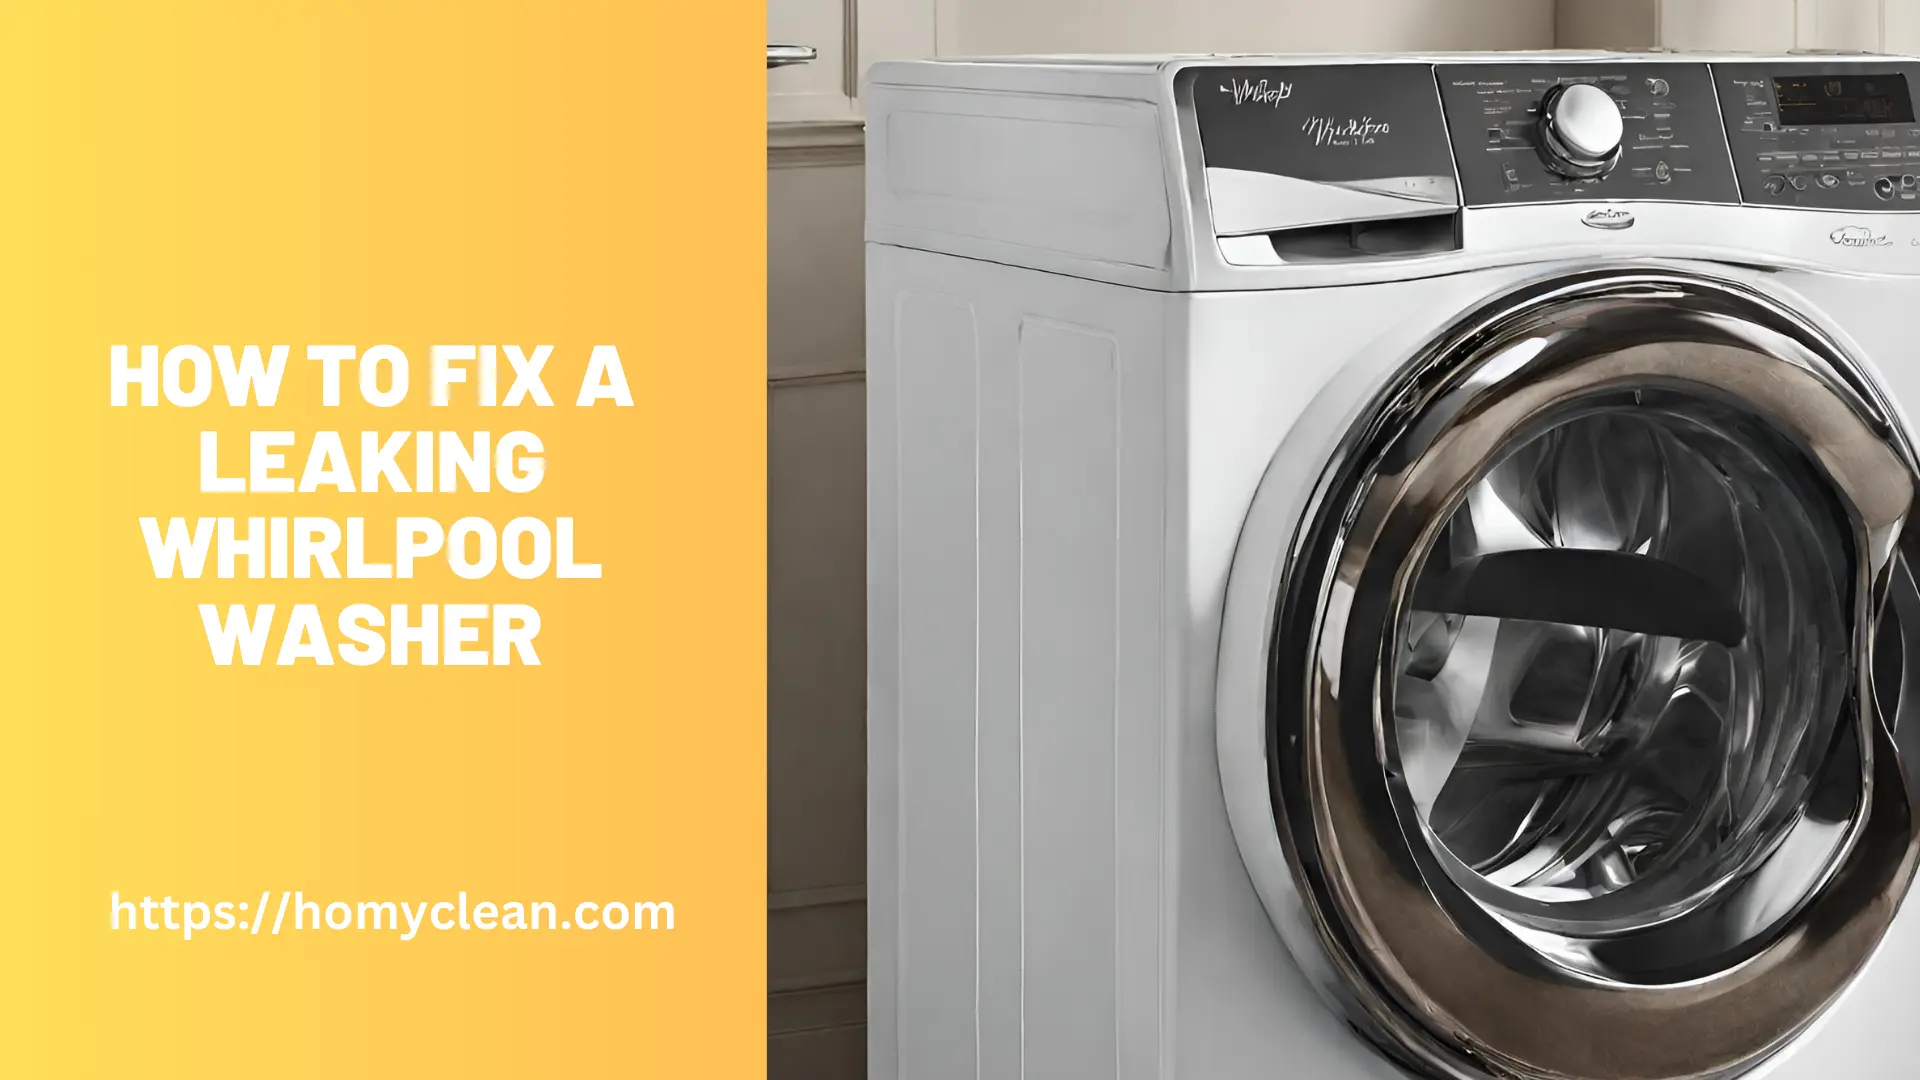 How to Fix Leaking Whirlpool Washer – Quick and Easy Solutions